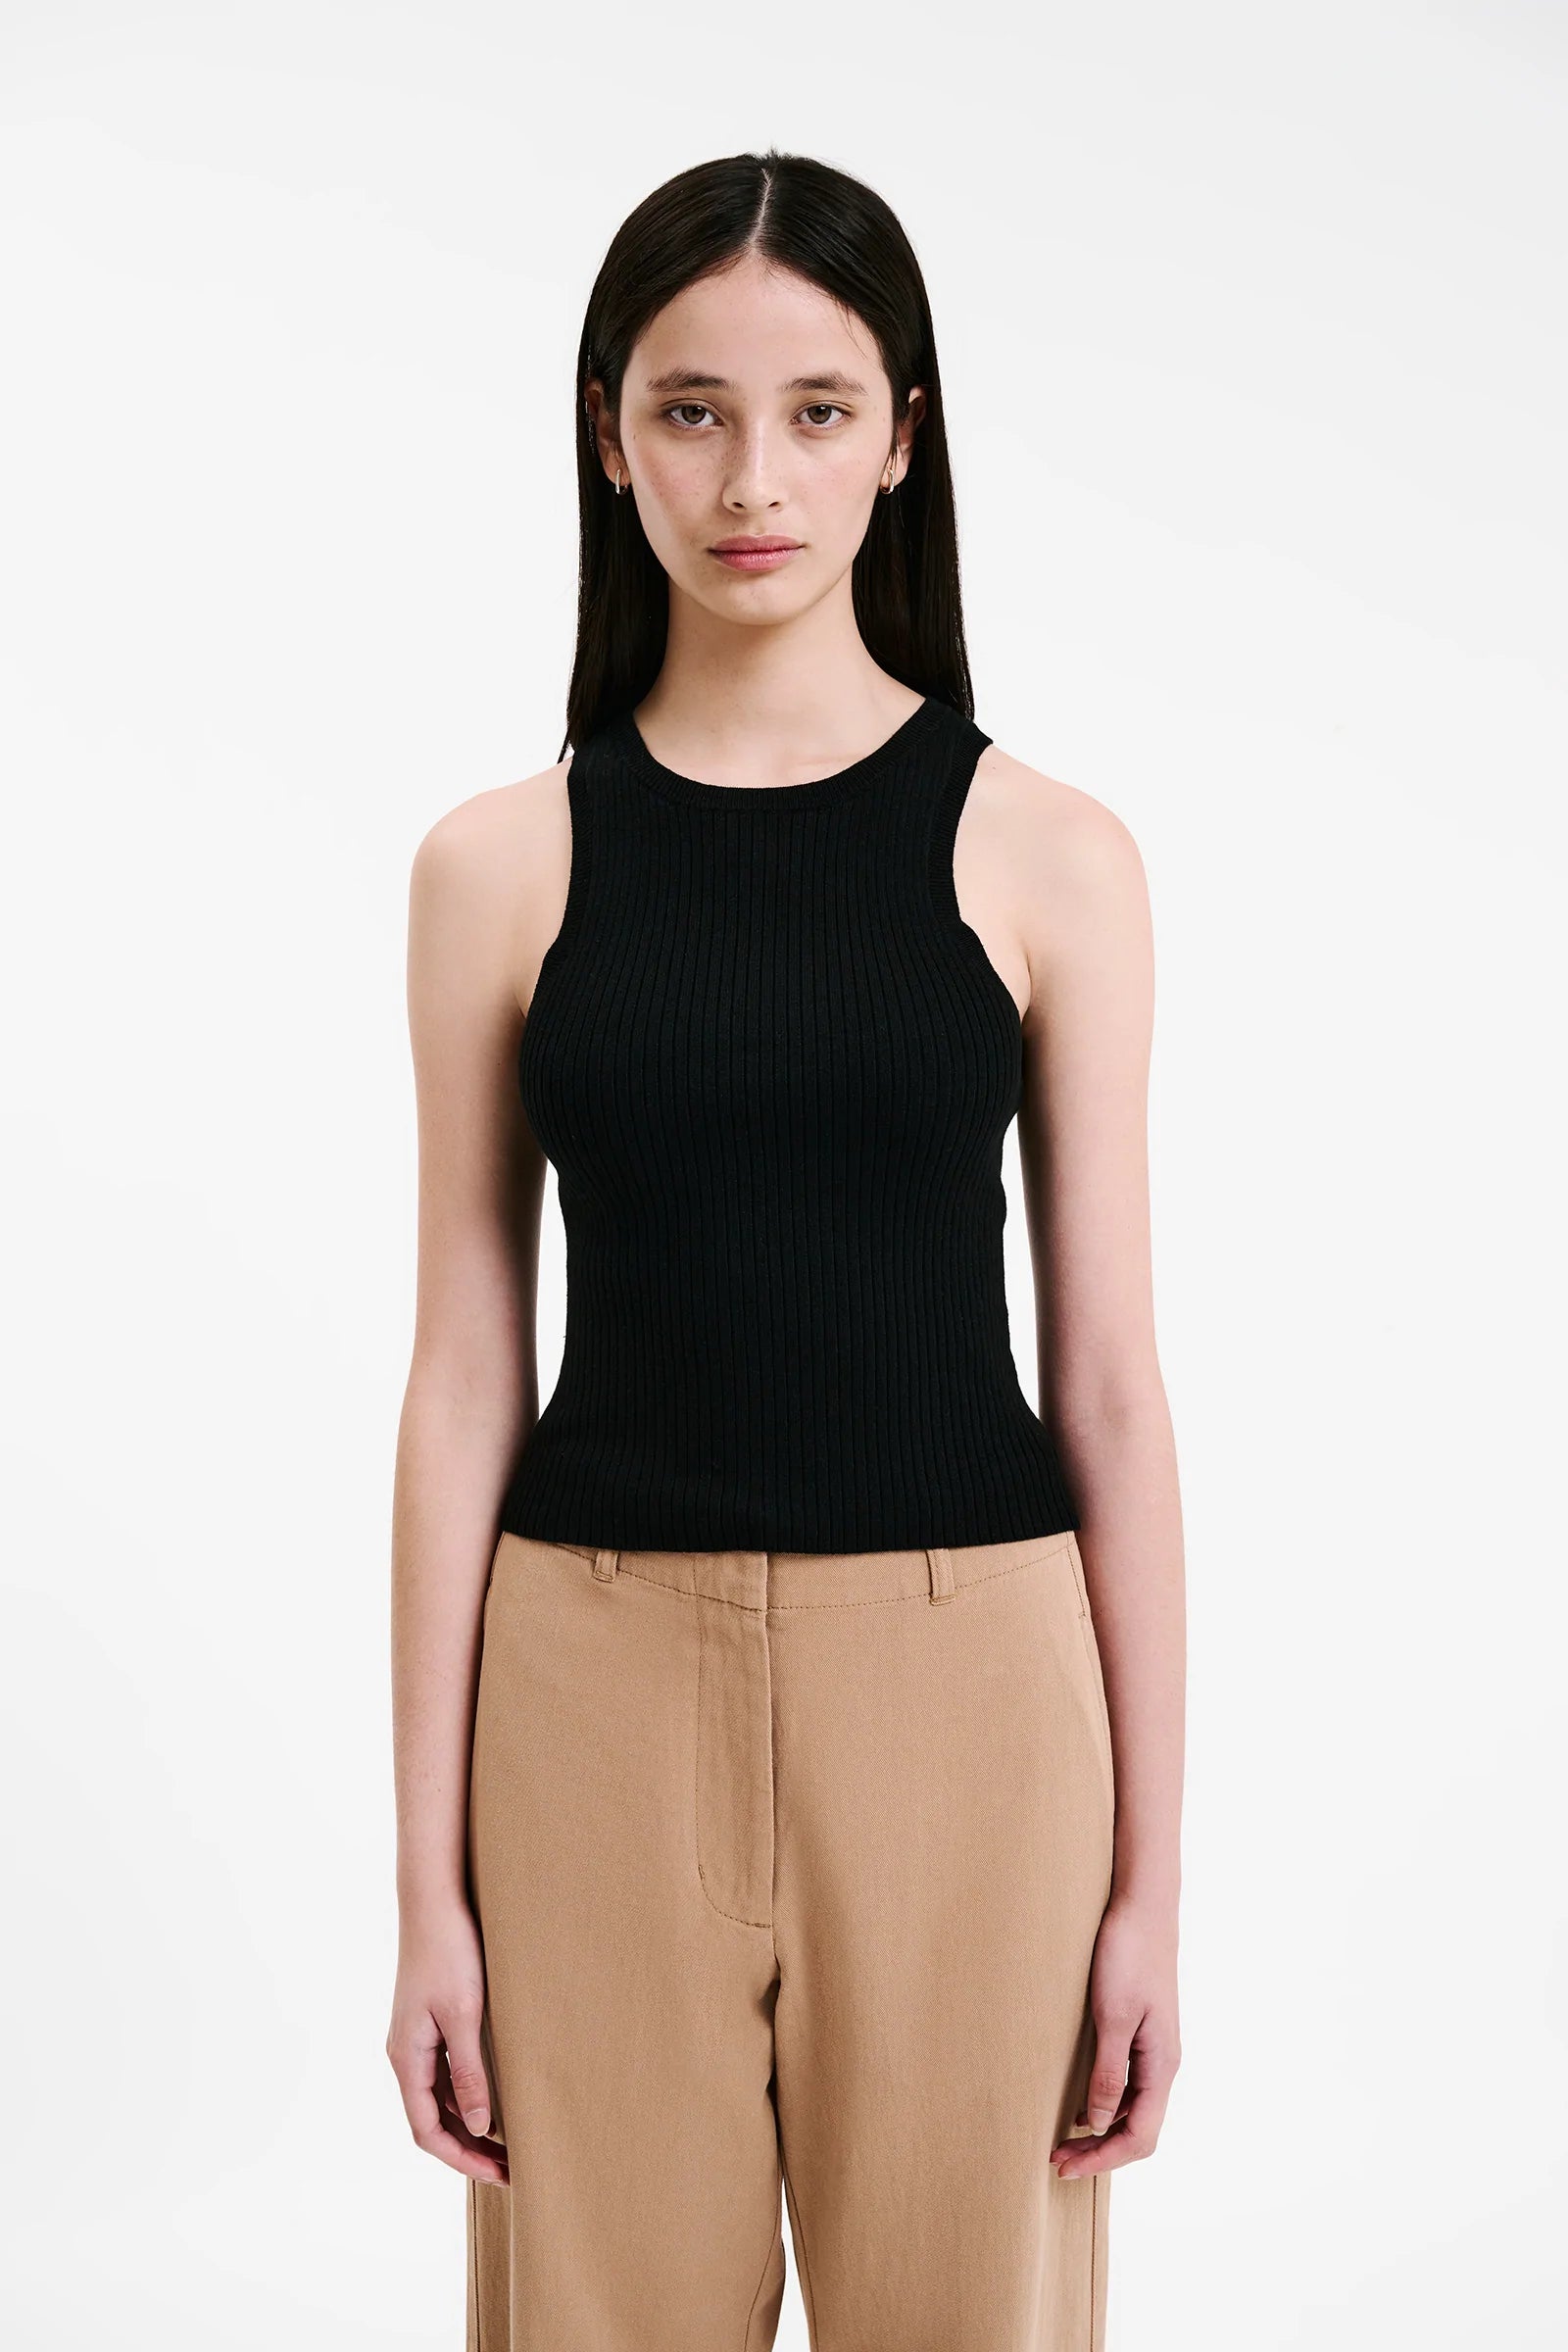 Nude Lucy Nude Classic Knit Tank Black